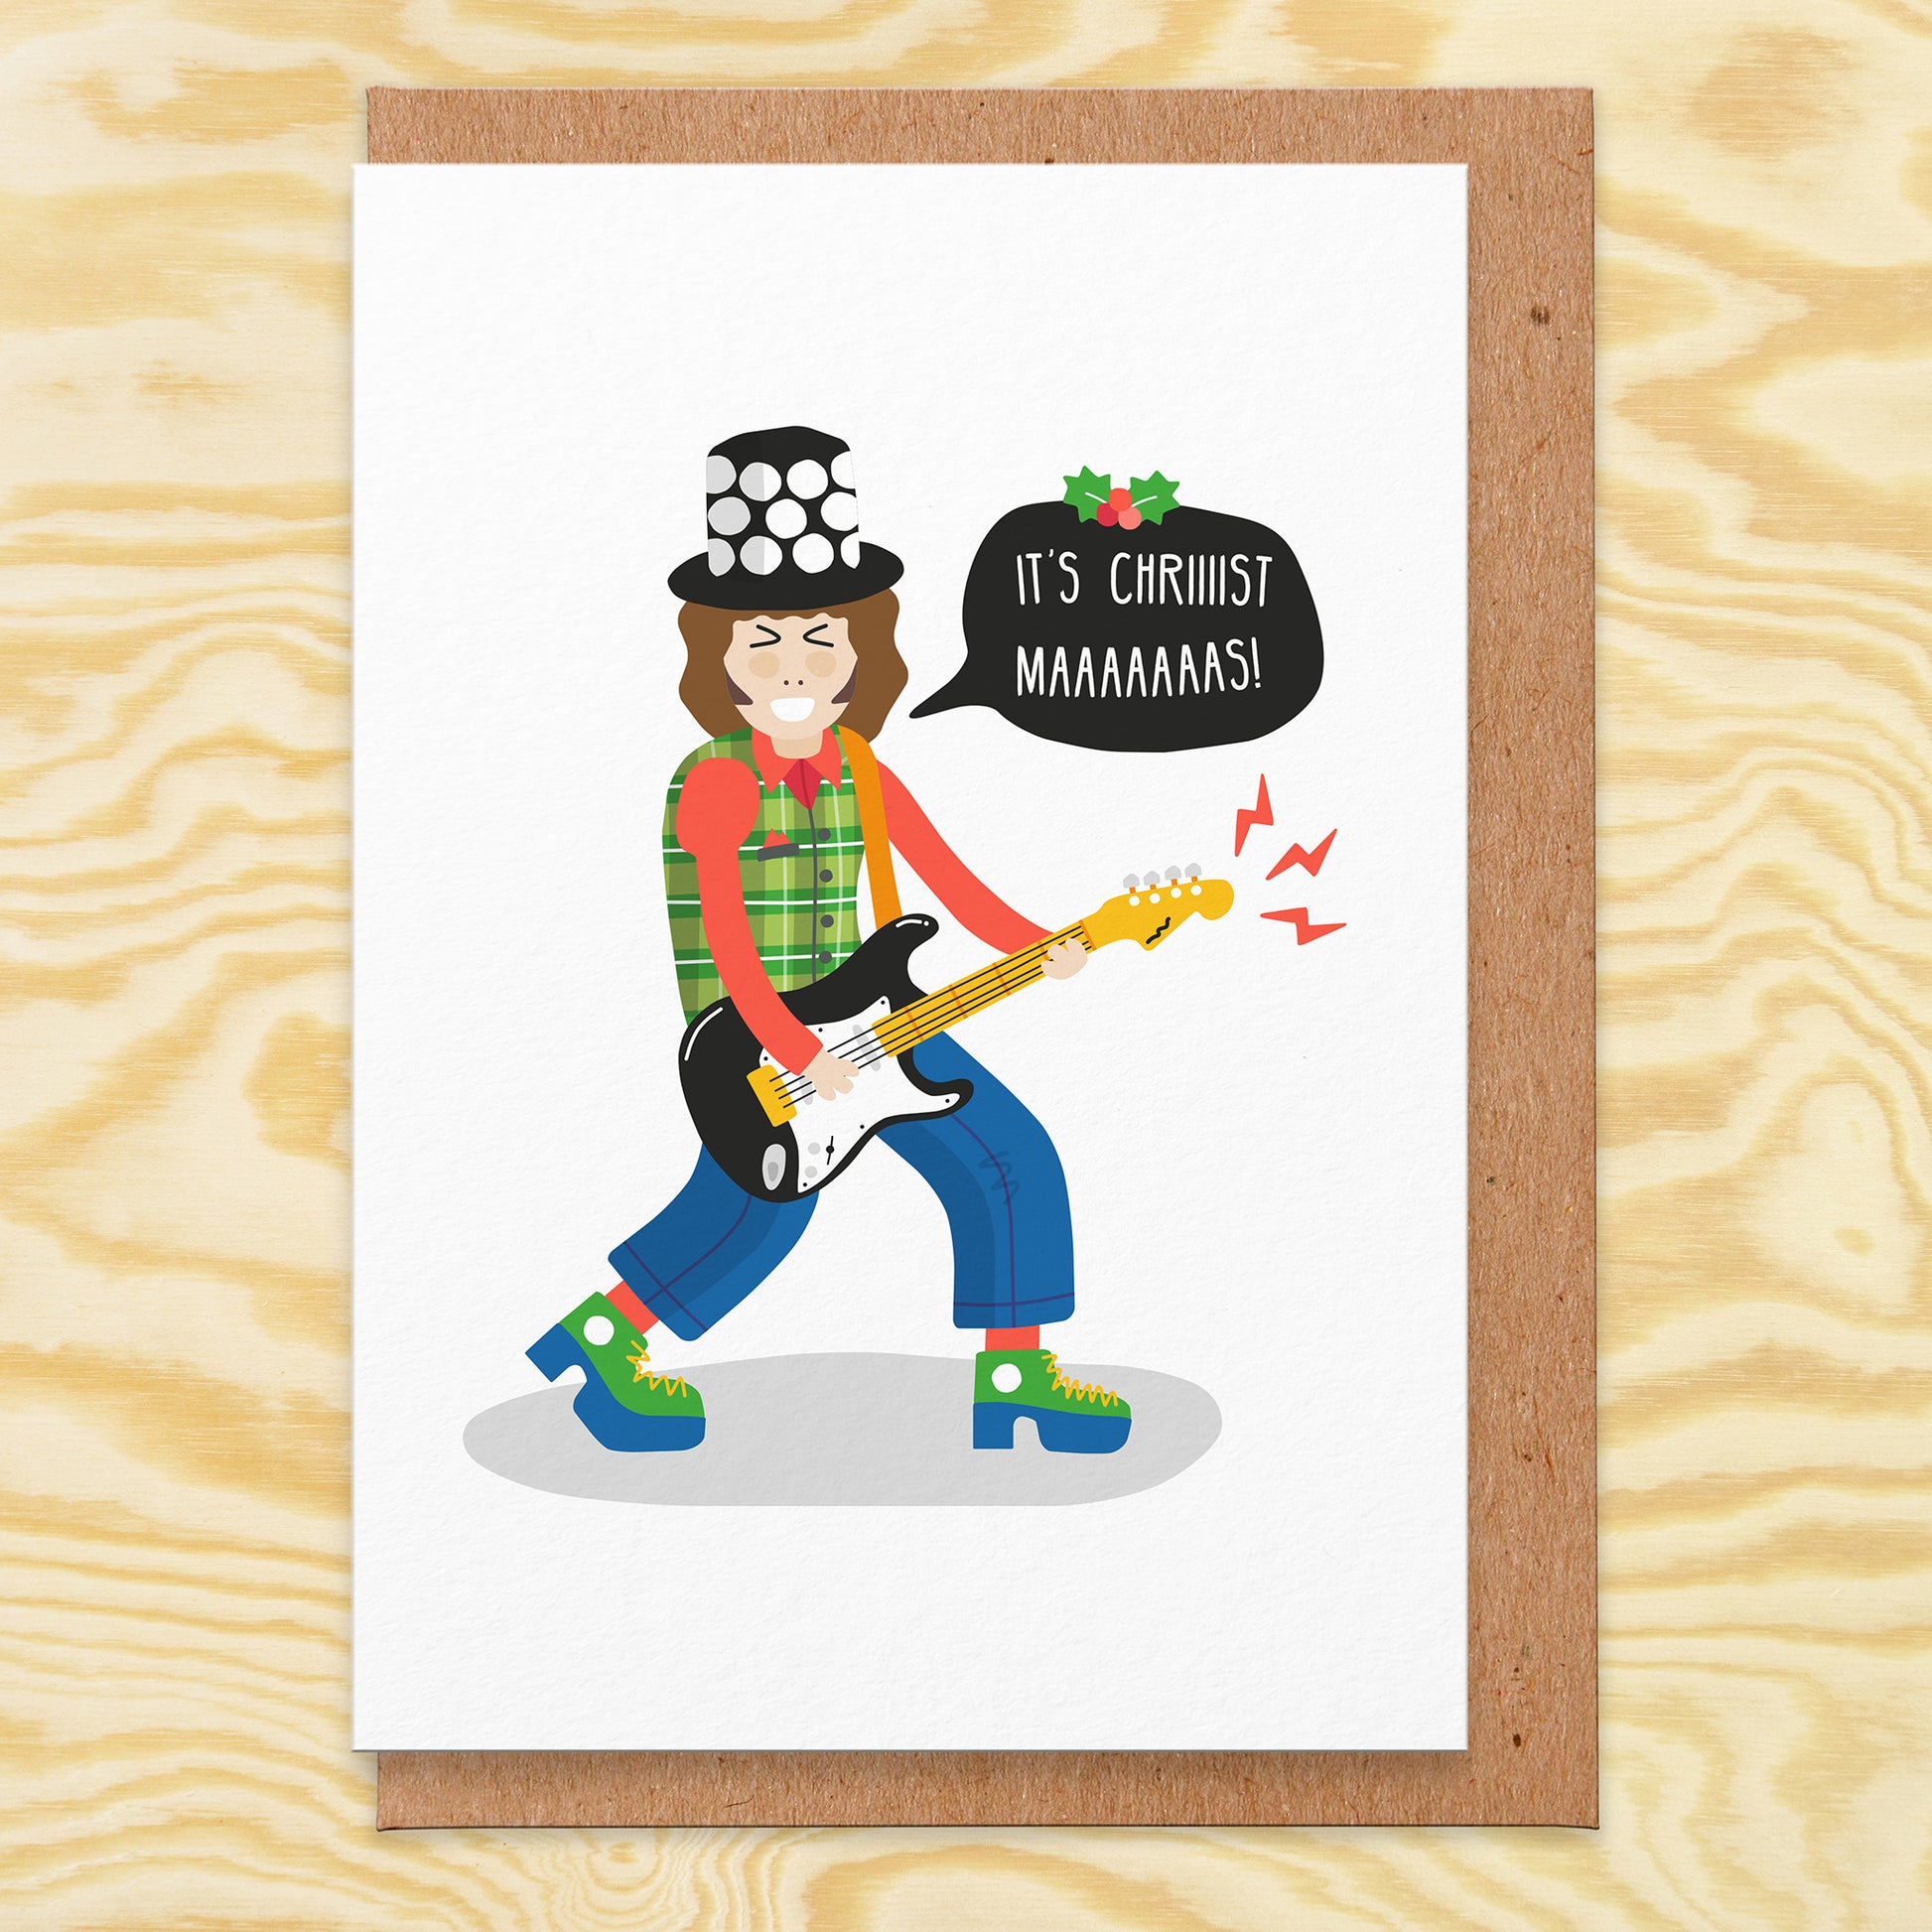 Christmas card with an illustration of Noddy Holder and he's saying it's Christmaaaaaaas!